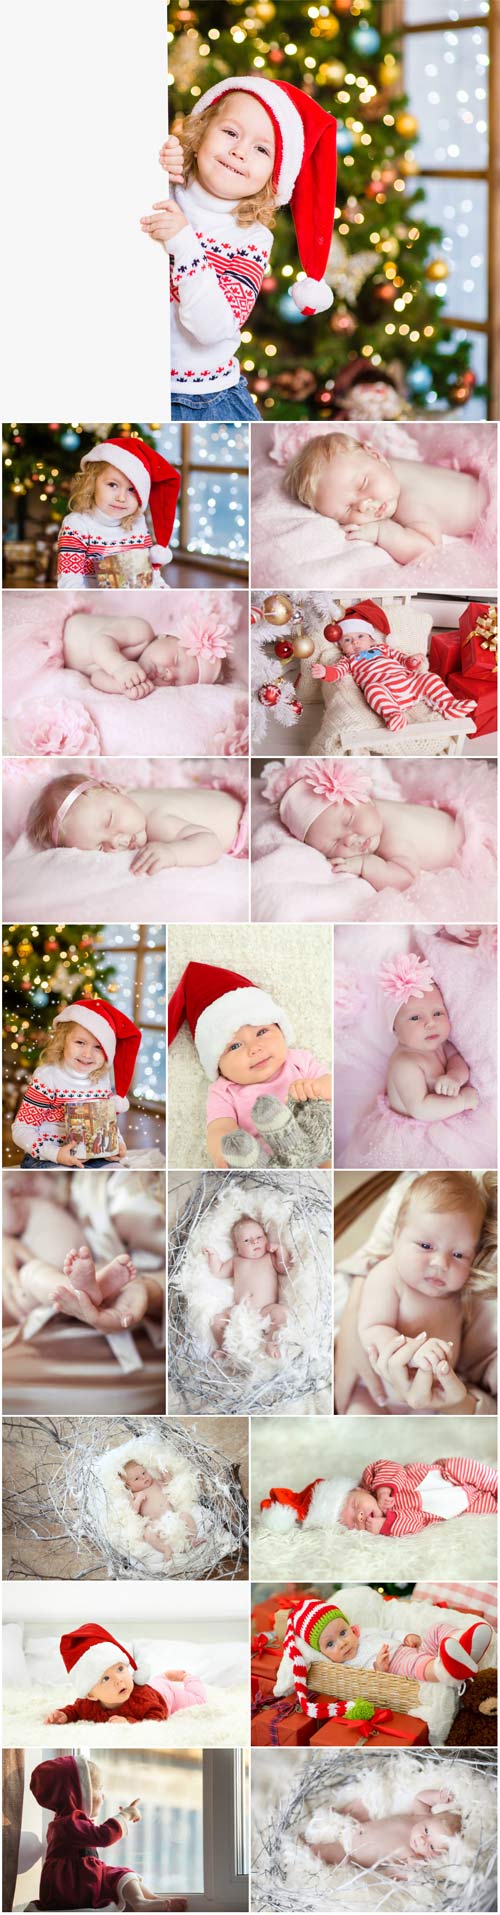 New Year and Christmas stock photos №60